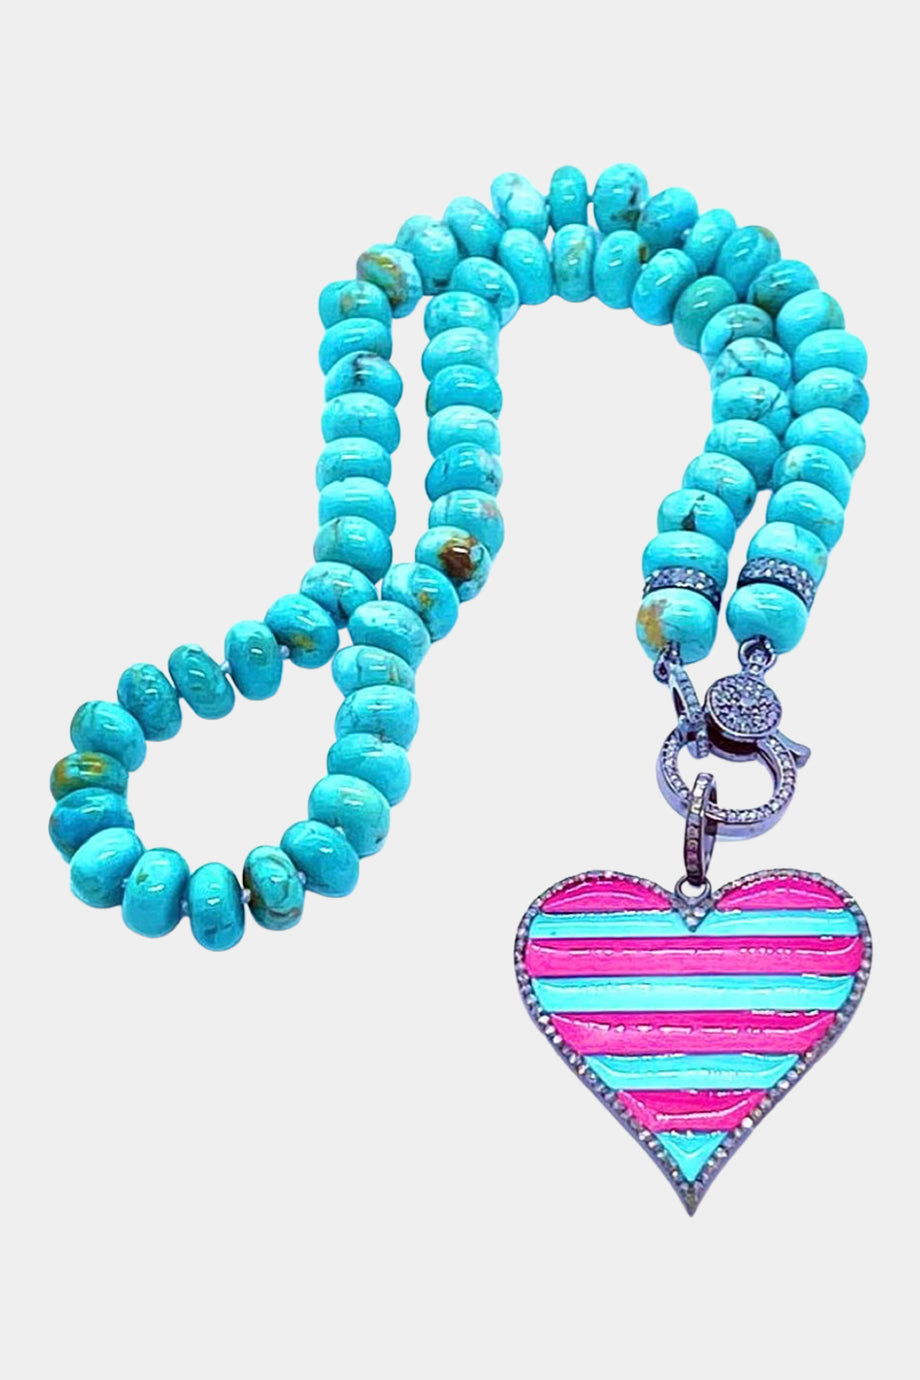 Turquoise Knotted Necklace with a Fuchsia & Turquoise Heart Pendant